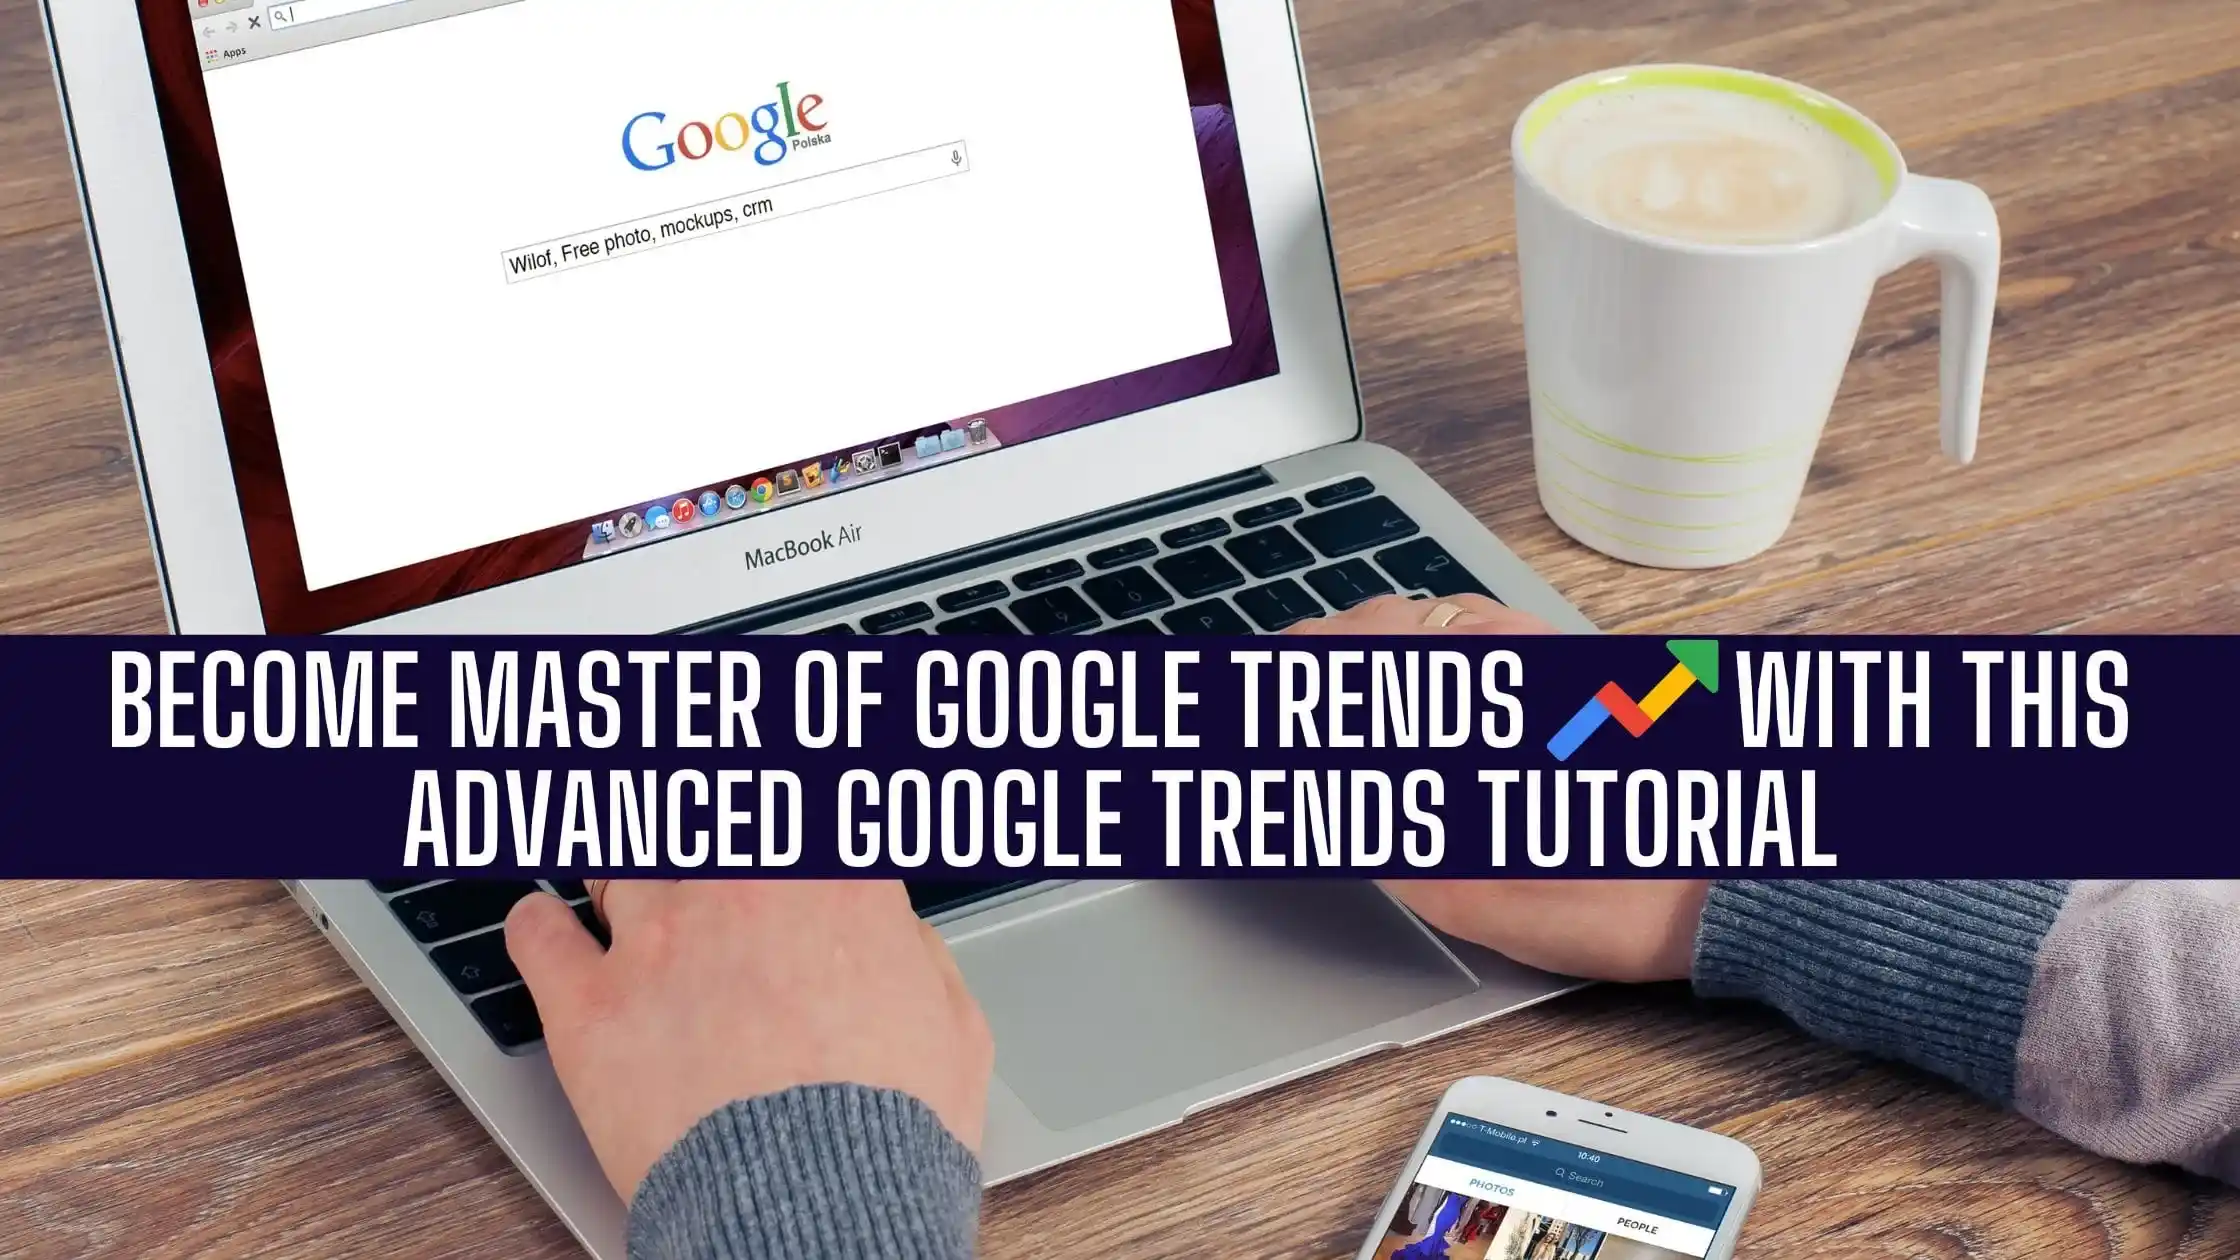 Become Master of Google Trends with this Advanced Google Trends Tutorial